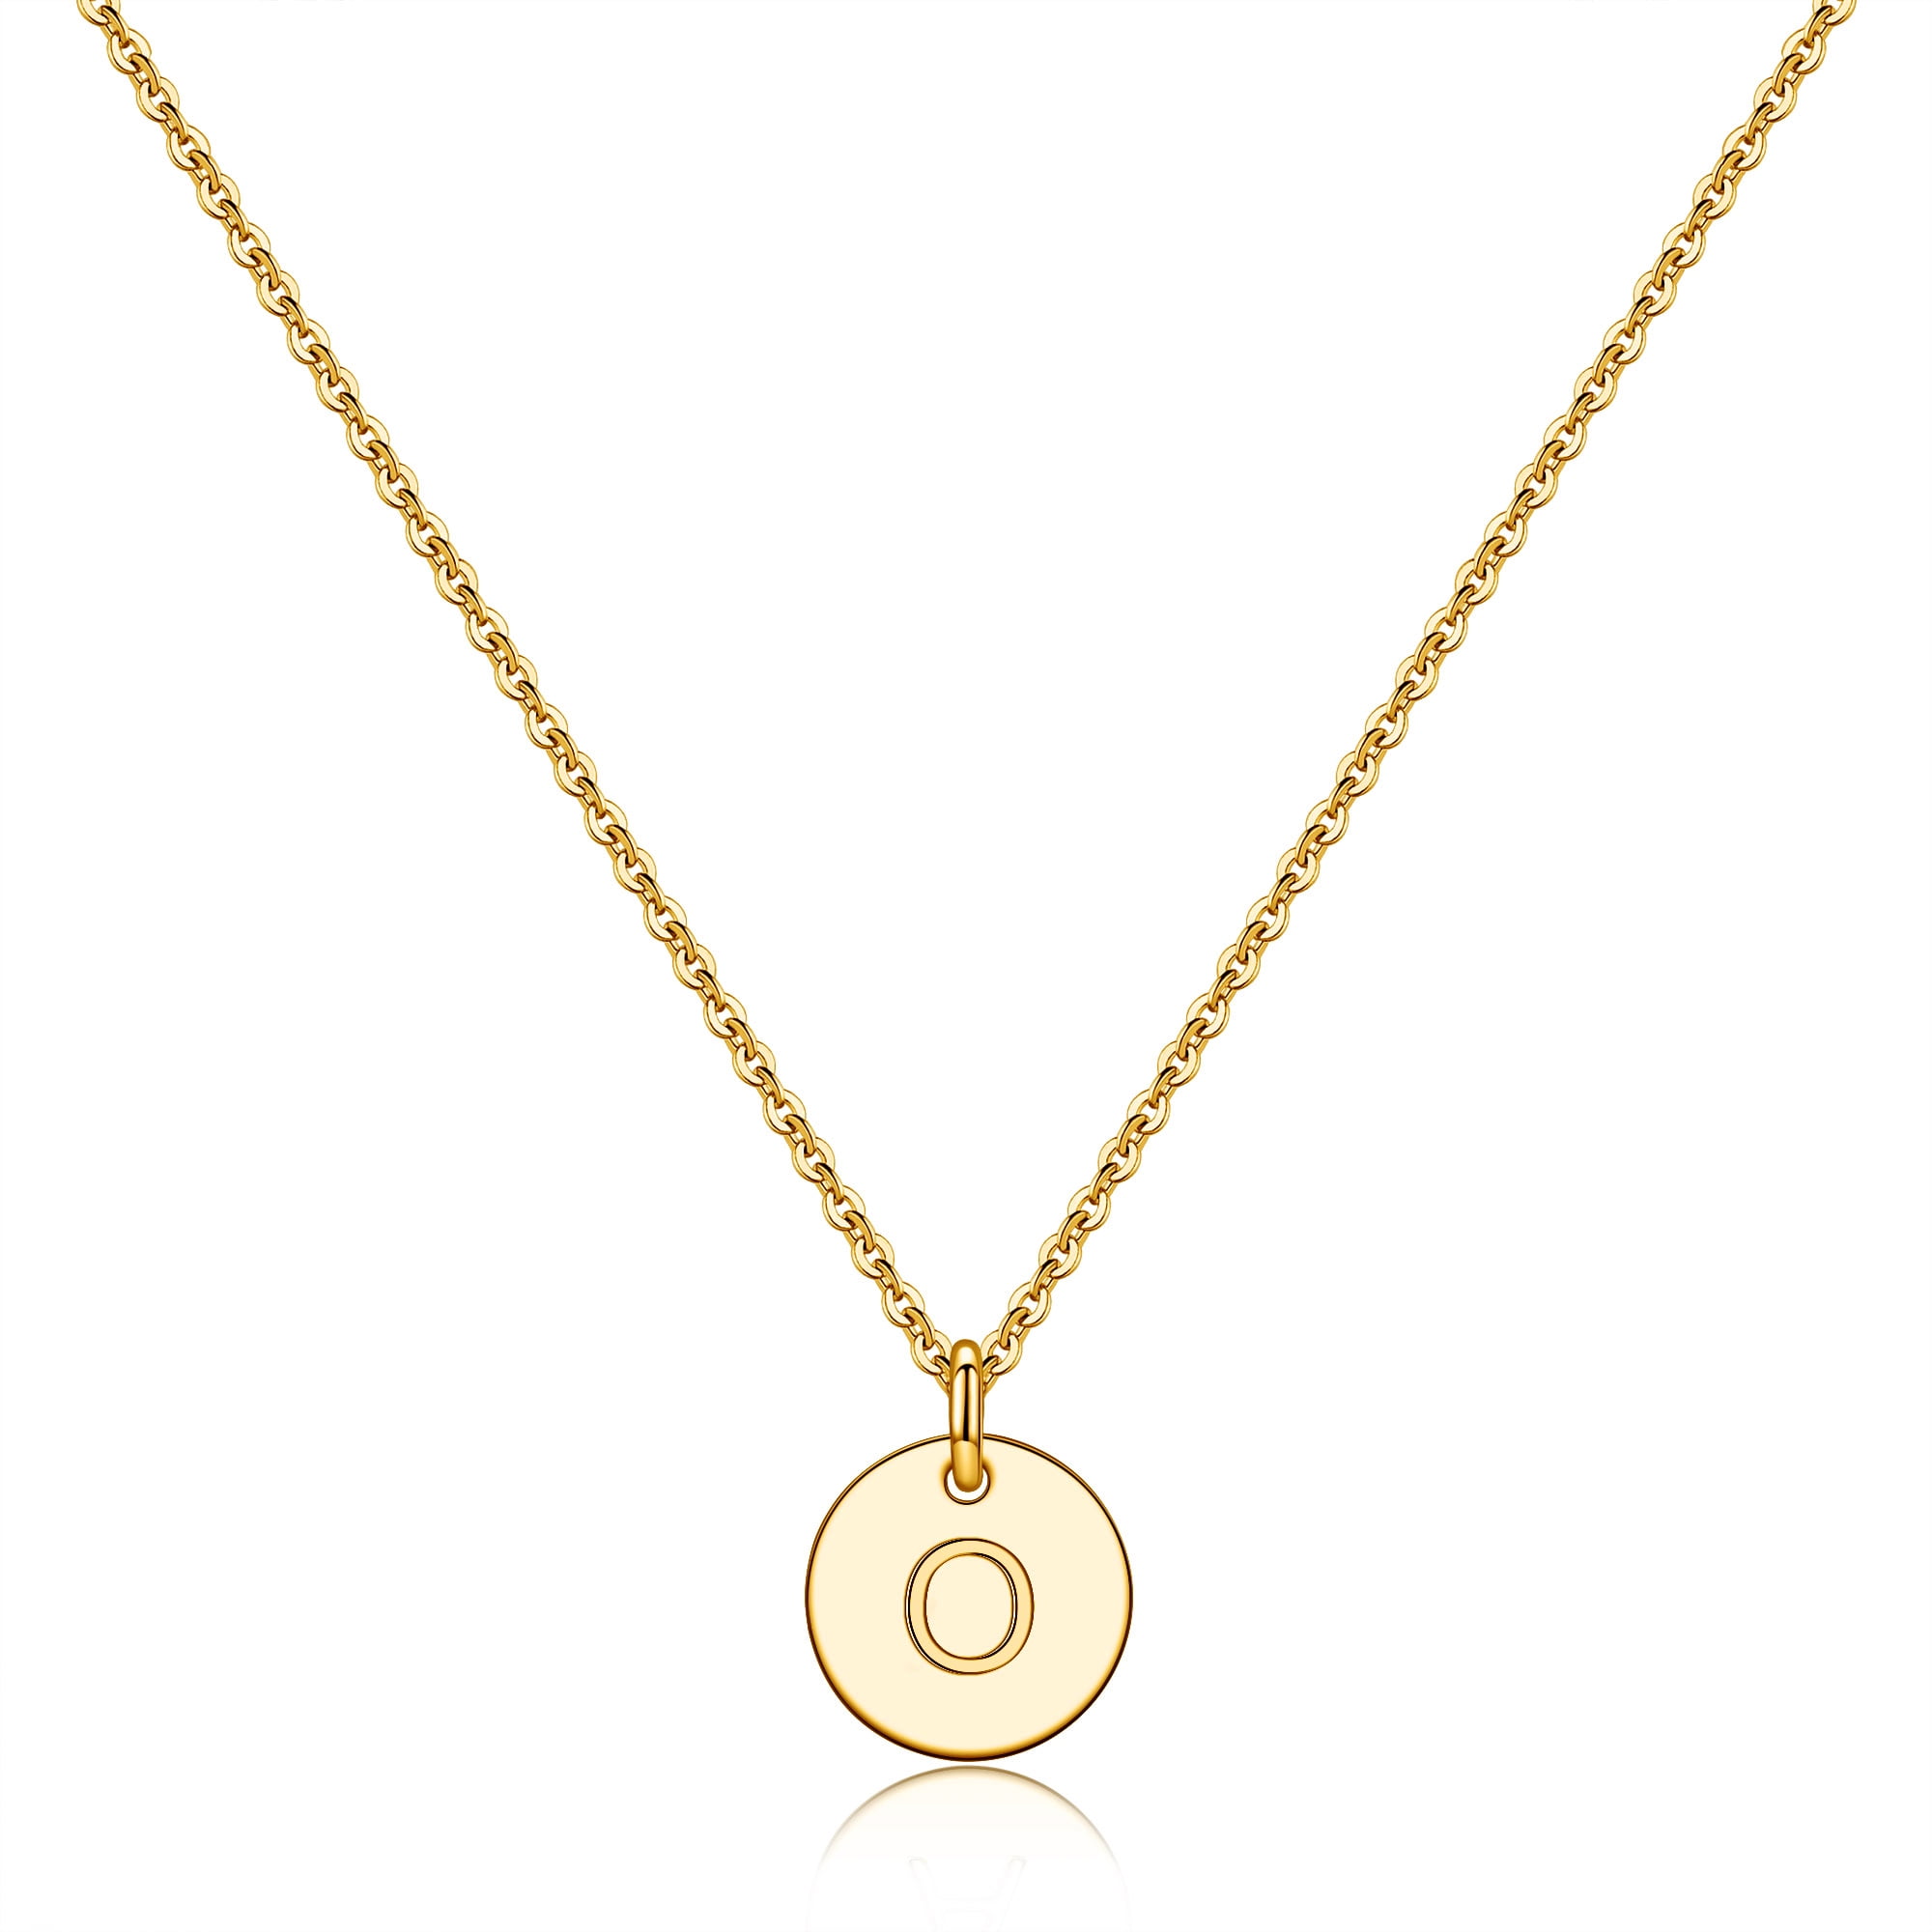 Hammered Necklace Initial Gold Filled Necklace Everyday Necklace Oval Disc Jewelry Personalized Gold Oval Necklace